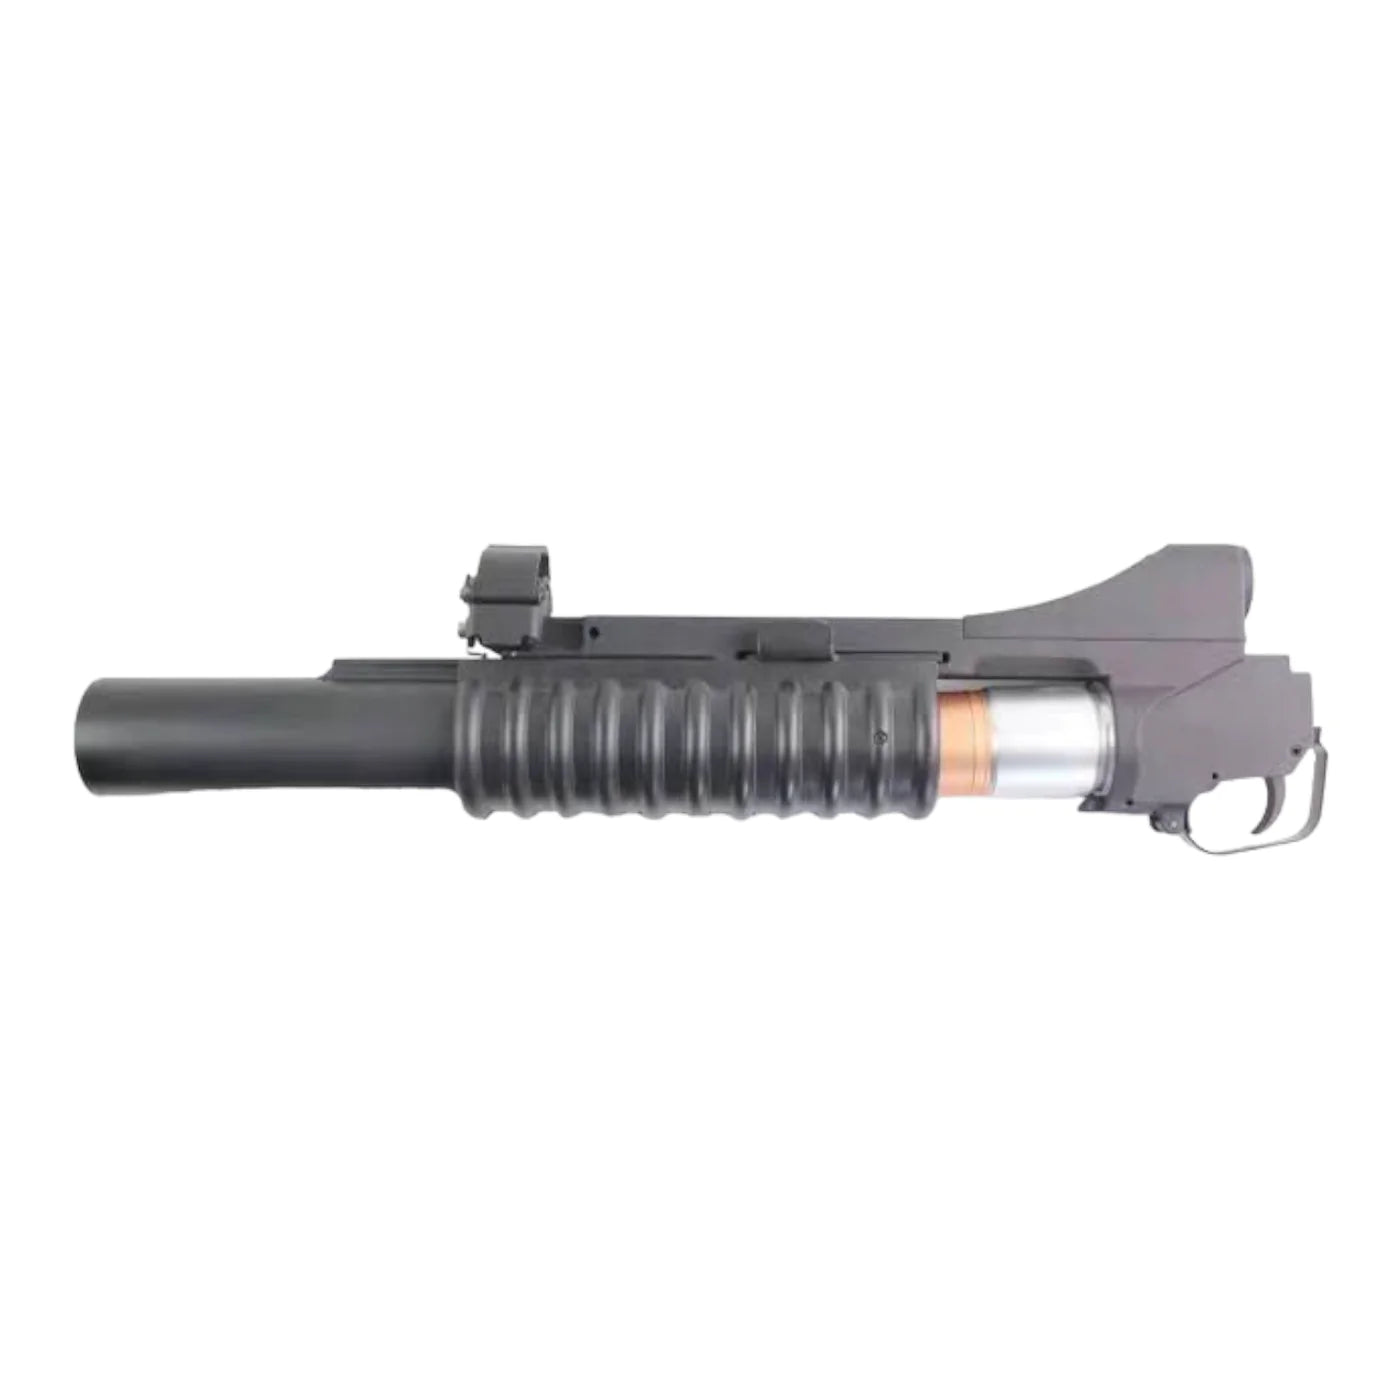 Double Bell Short M203 Airsoft Gas Grenade Launcher *No Grenade*